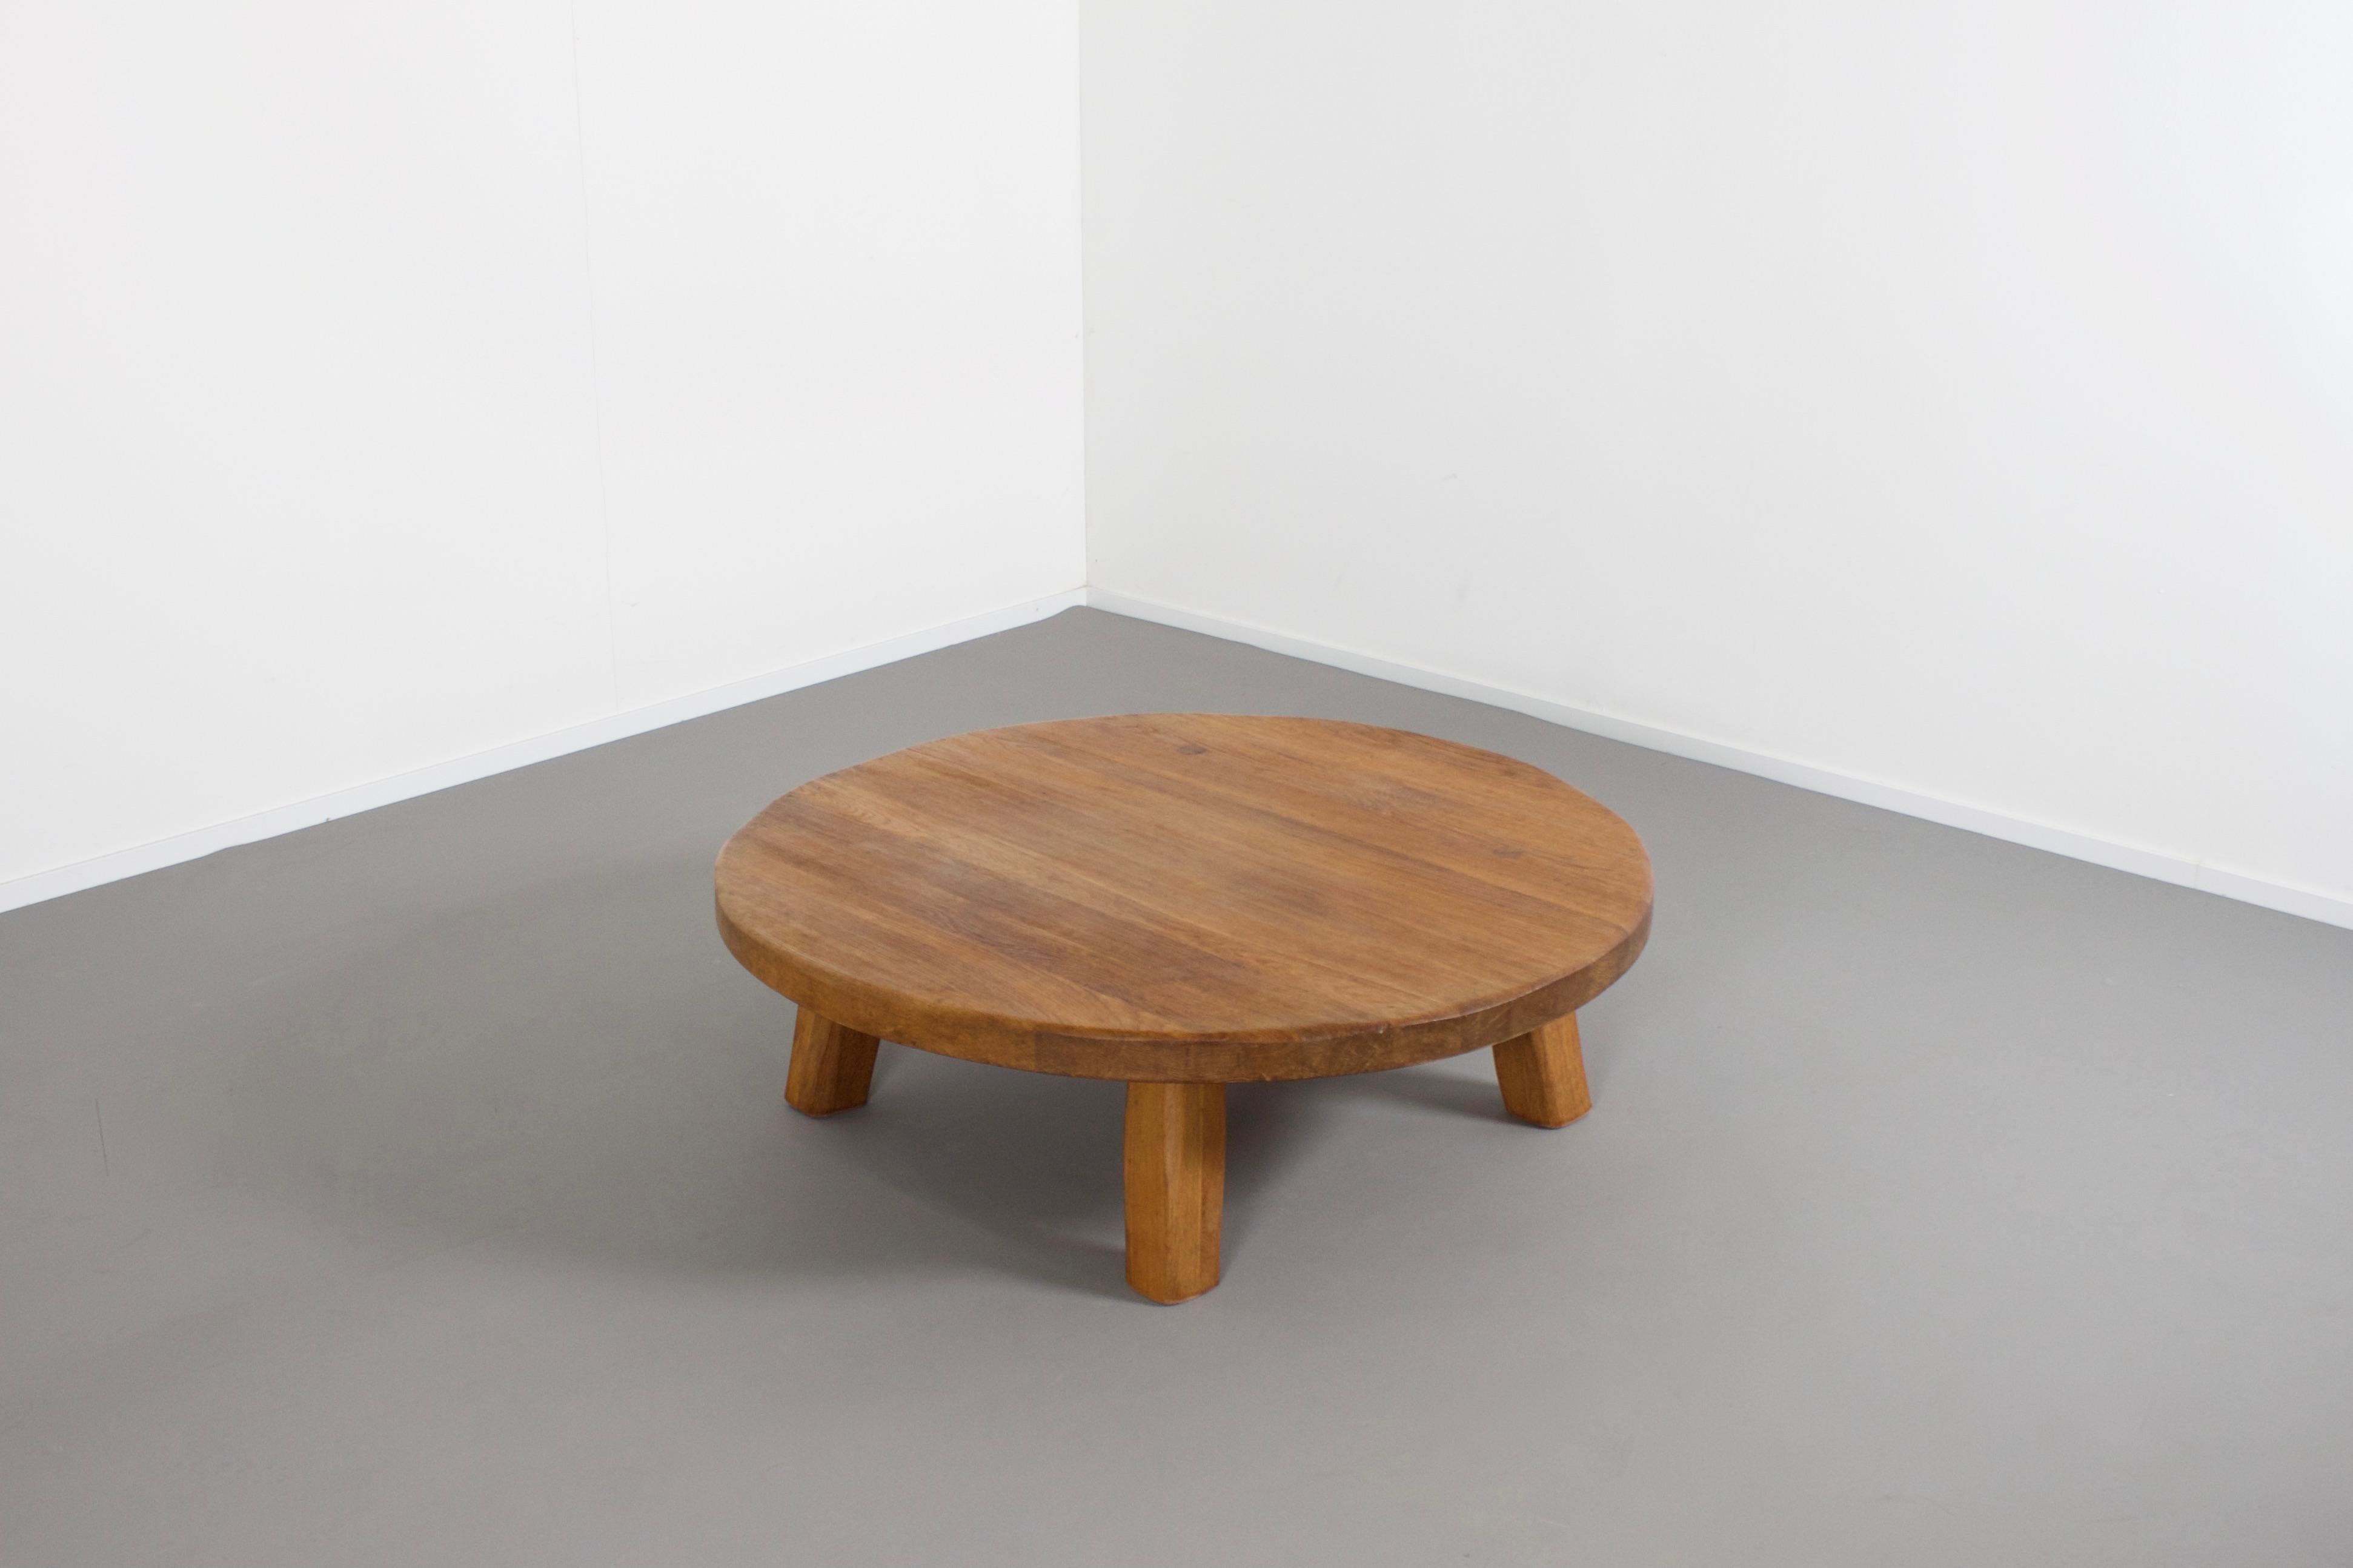 Impressive handmade coffee table in very good original condition.

The table is made of solid French oak.

The thick round top is carved which gives it a rustic look it is attached to the base with four visible joints. 

The base is also made of